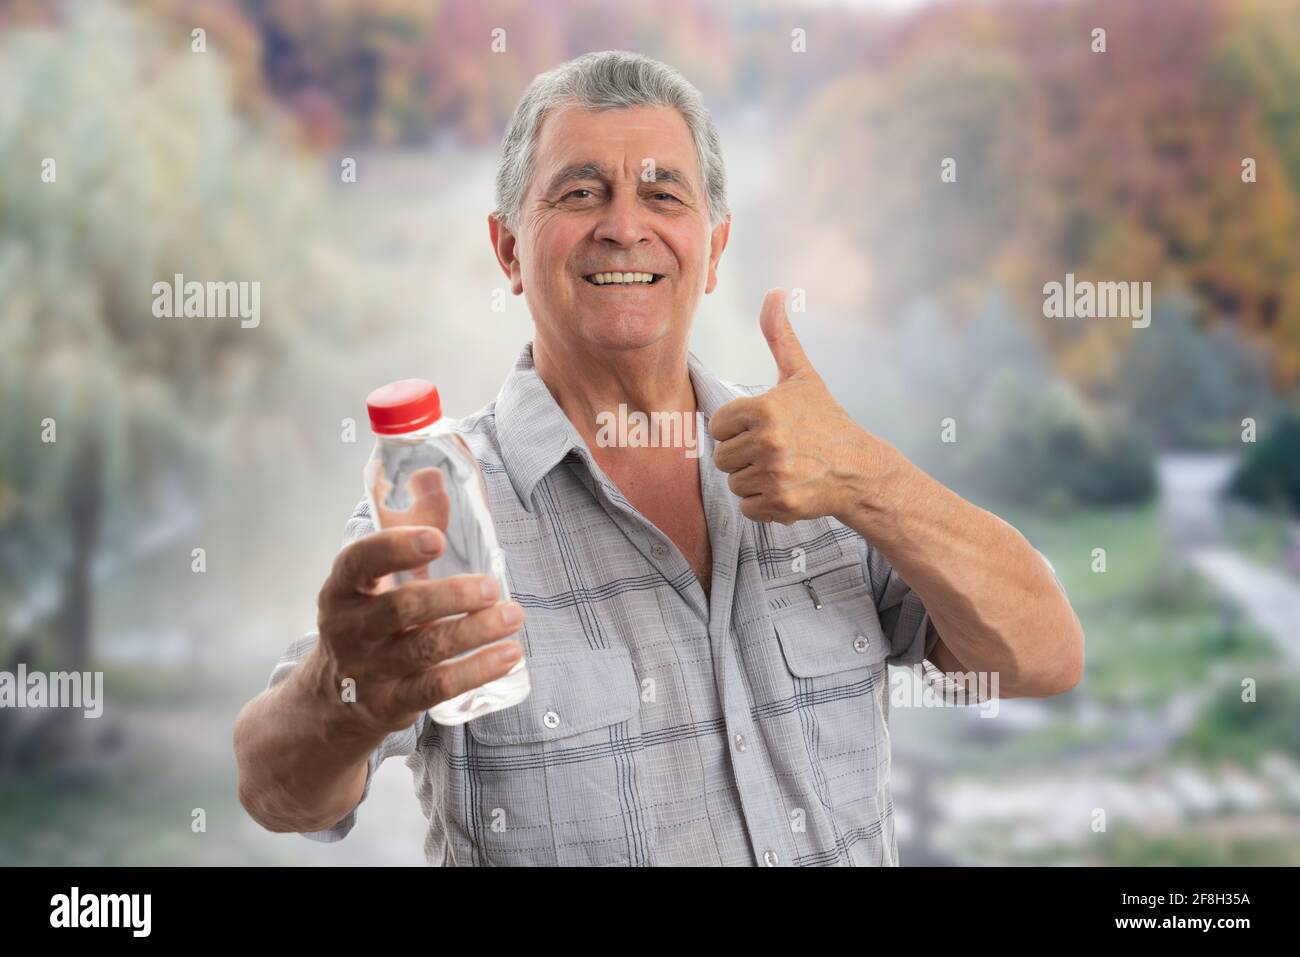 https://c8.alamy.com/comp/2F8H35A/old-man-wearing-casual-summer-shirt-clothing-holding-water-bottle-smiling-making-thumb-up-like-gesture-as-hydration-concept-forest-nature-background-2F8H35A.jpg